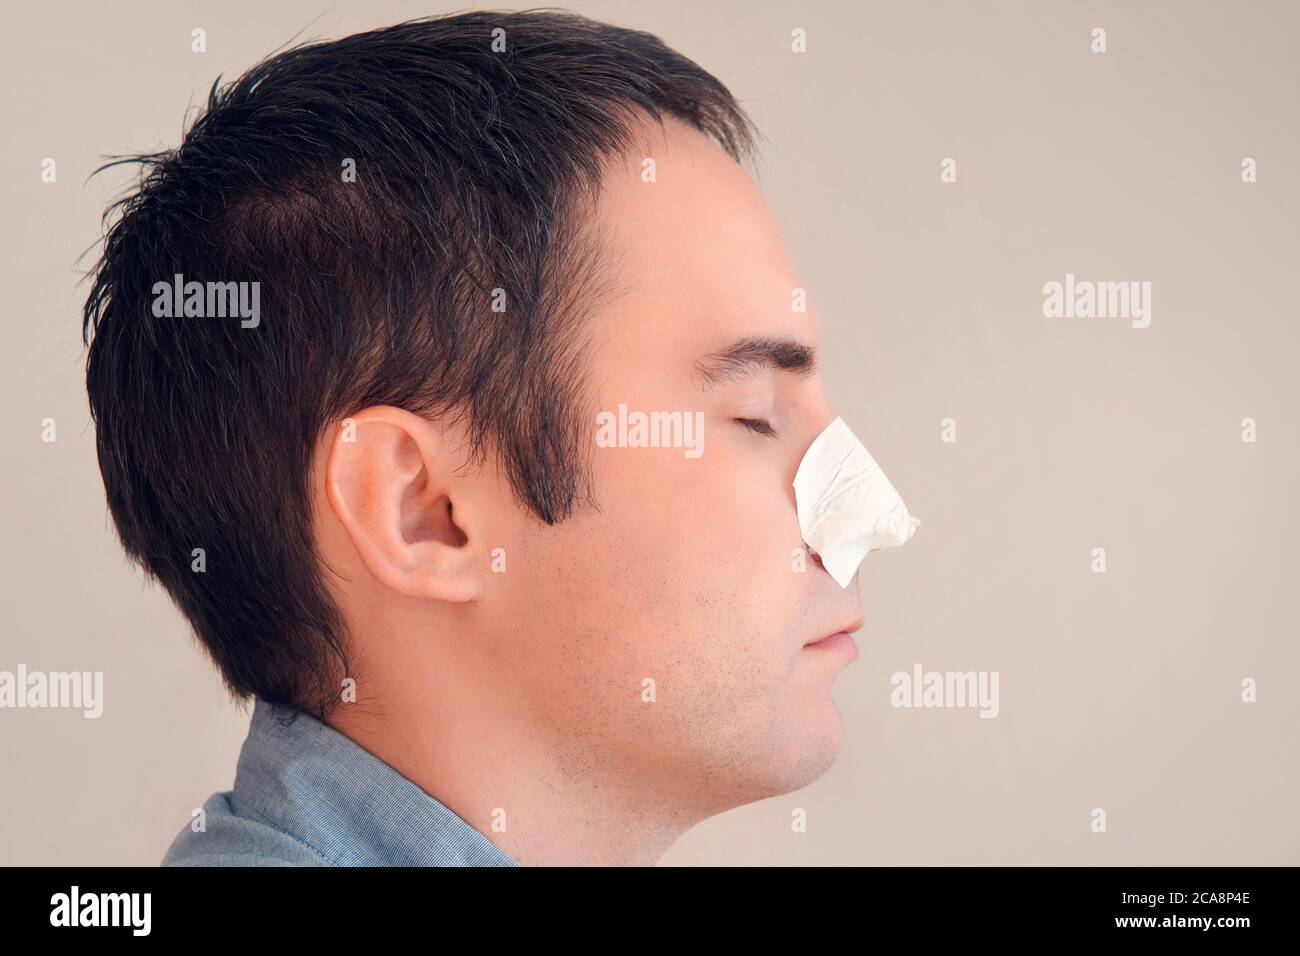 man puts on and removes a strip for the nose from black dots. Coal cleaning strips from blackheads and comedones. concept of personal care. Stock Photo